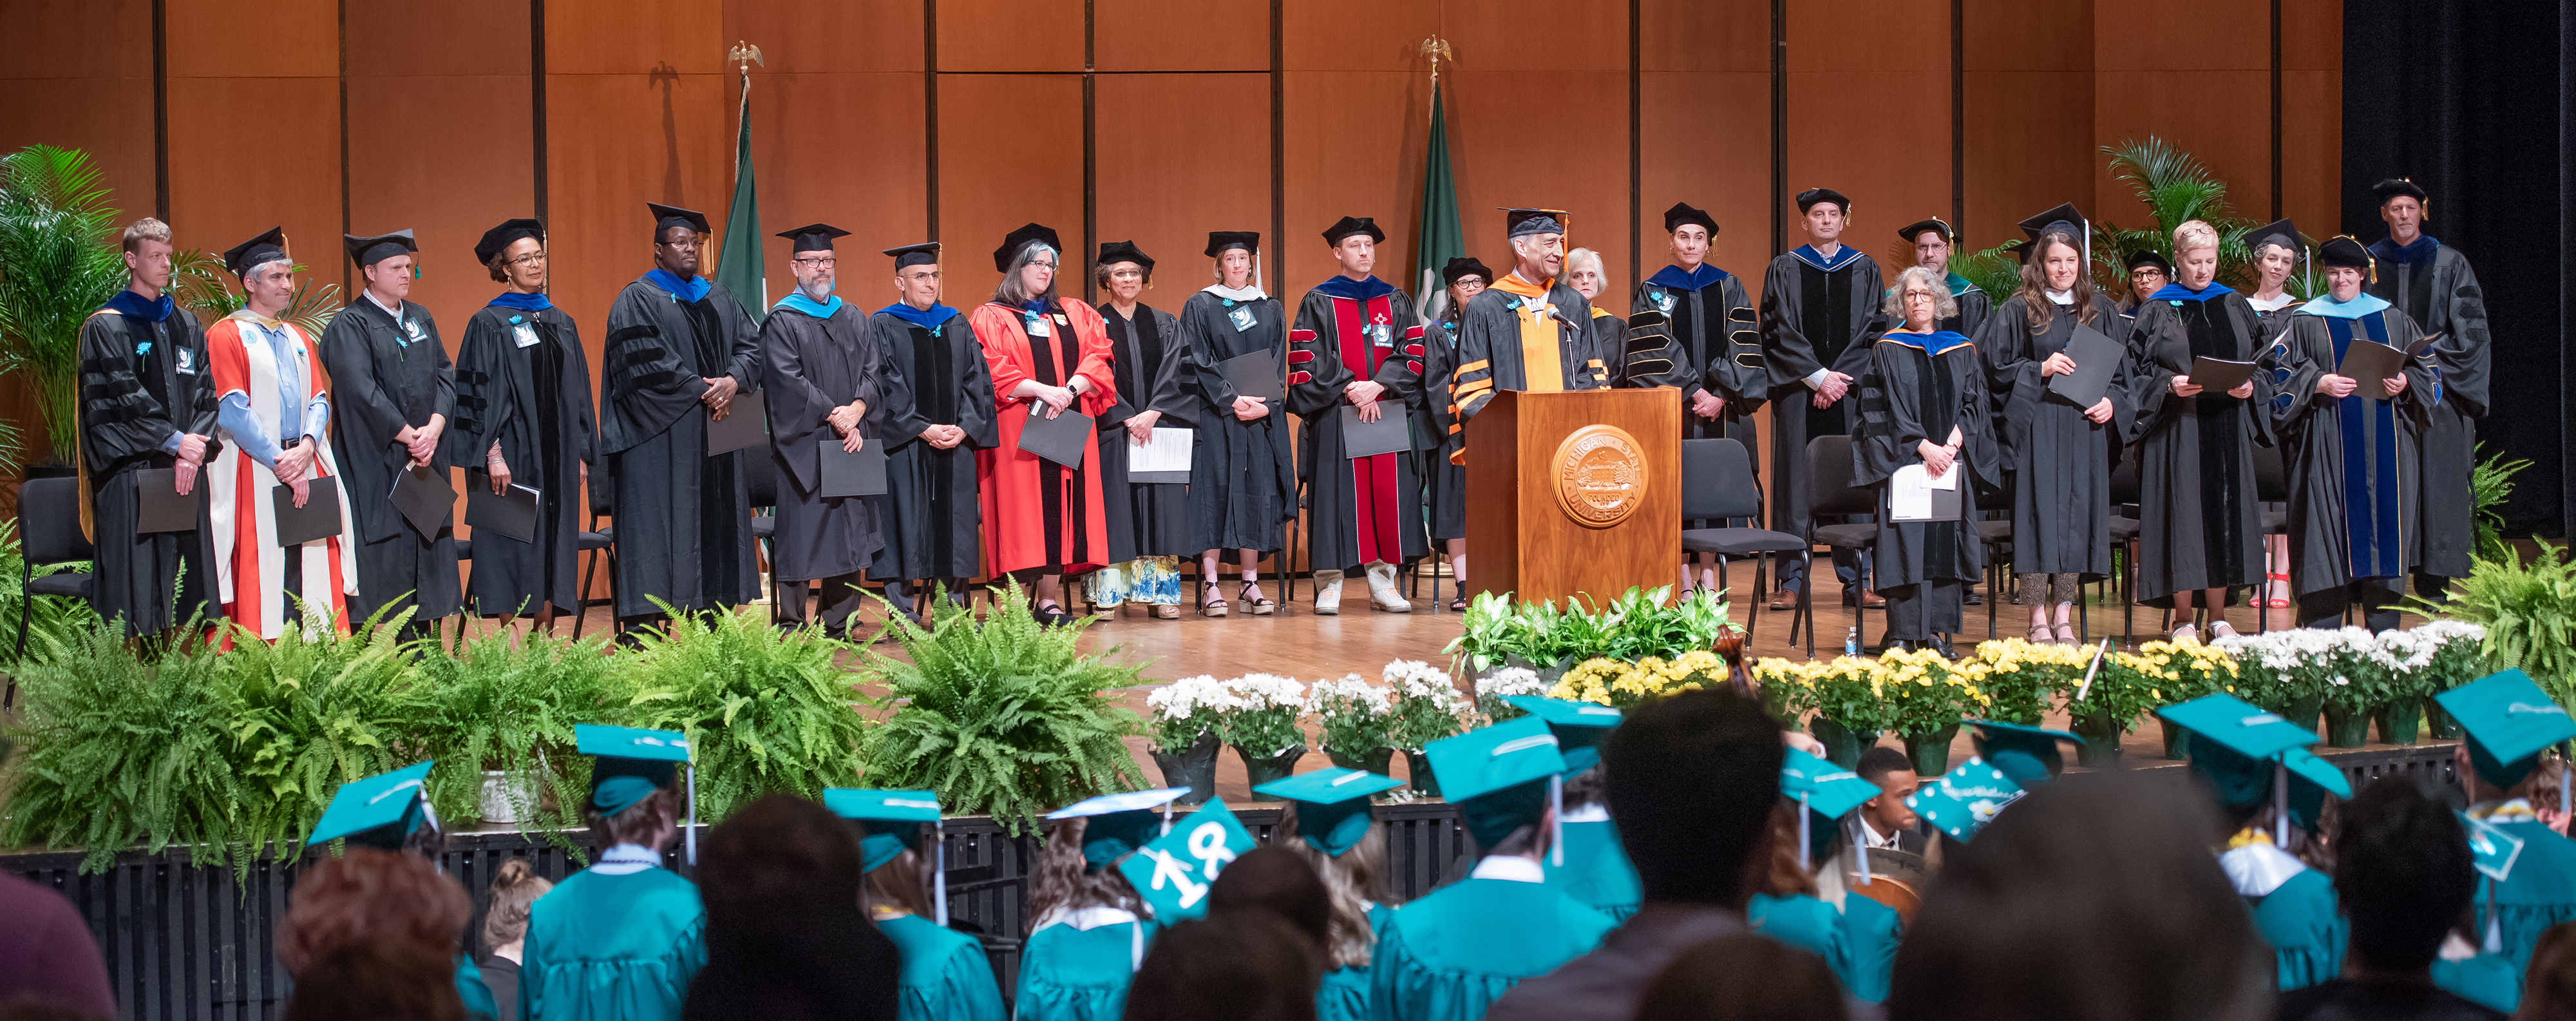 A view of the stage at the 2019 commencement, showing faculty in their regalia in front of students in green graduation robes.